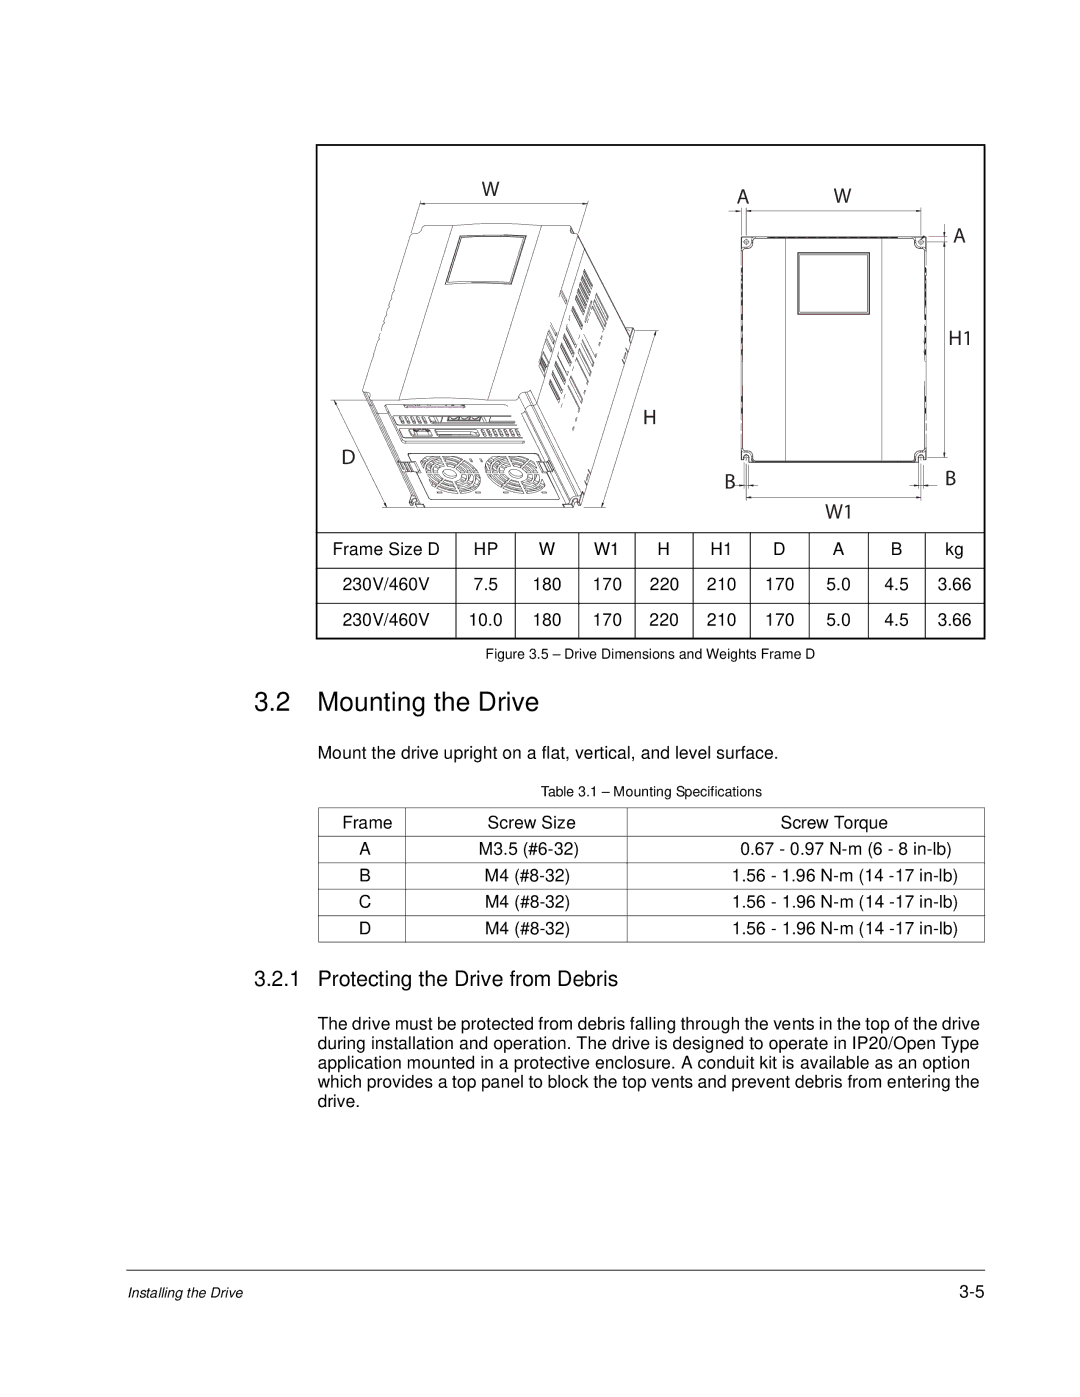 Baldor VS1MD instruction manual Mounting the Drive, Protecting the Drive from Debris, Frame Screw Size Screw Torque 